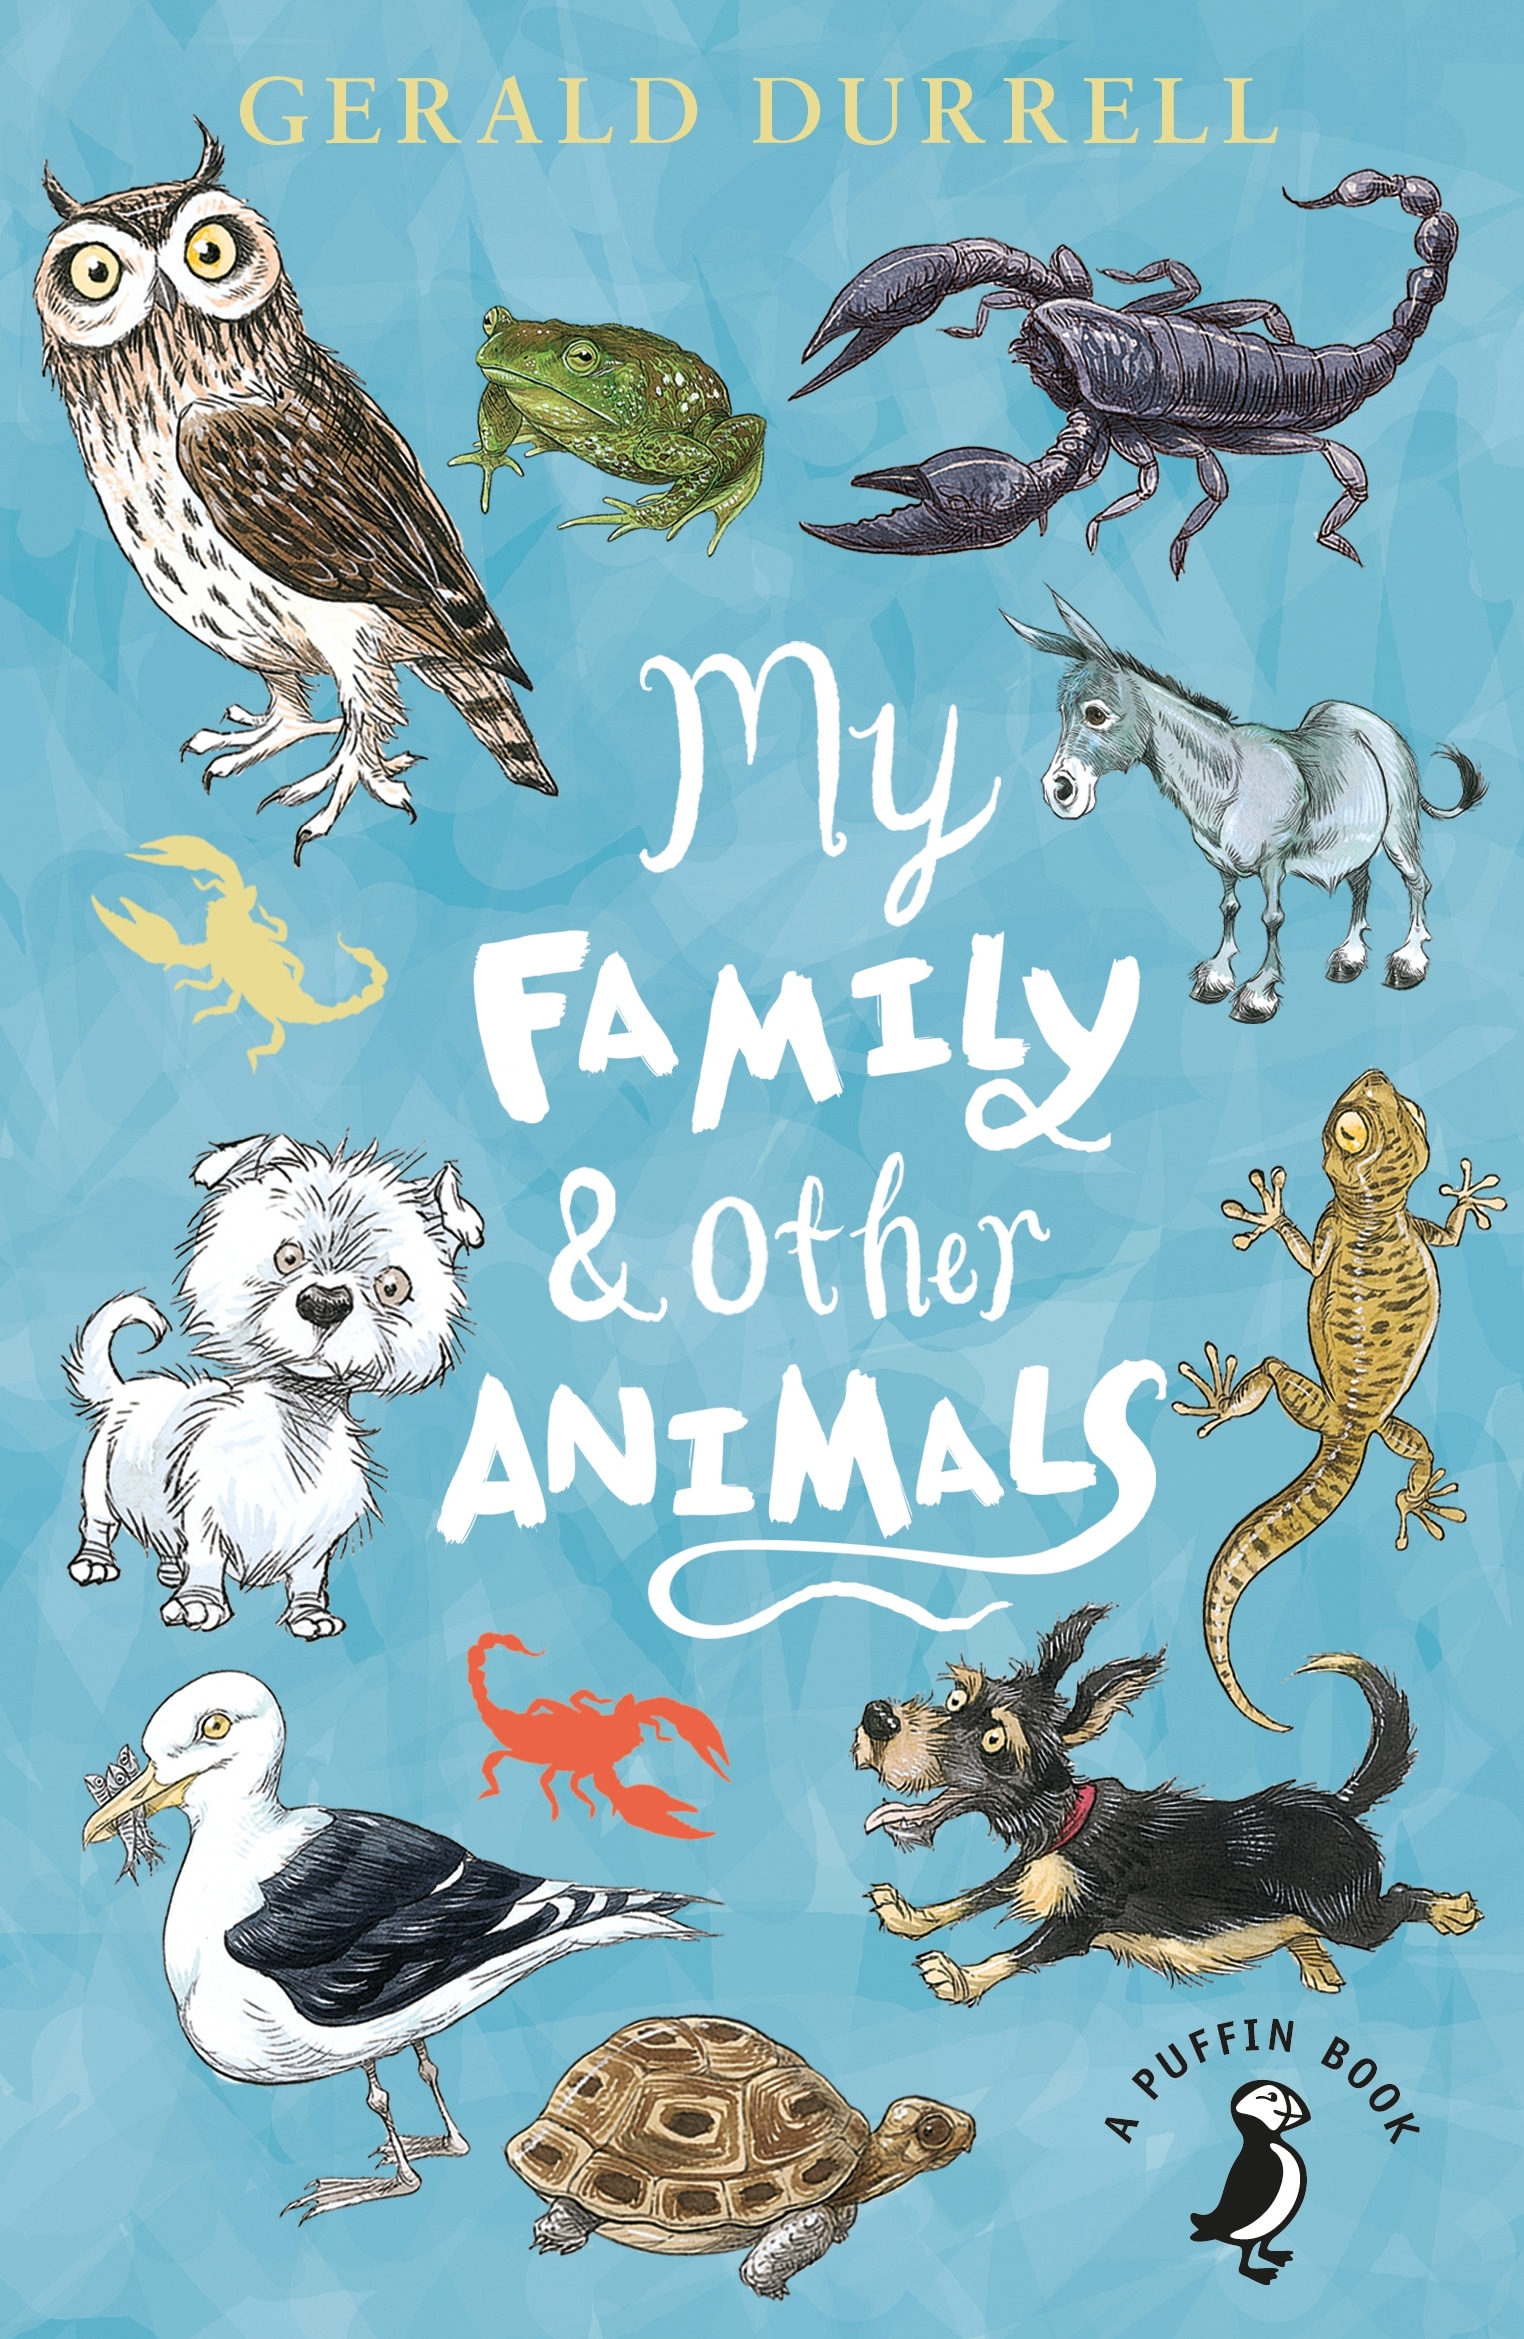 Book “My Family and Other Animals” by Gerald Durrell — May 5, 2016